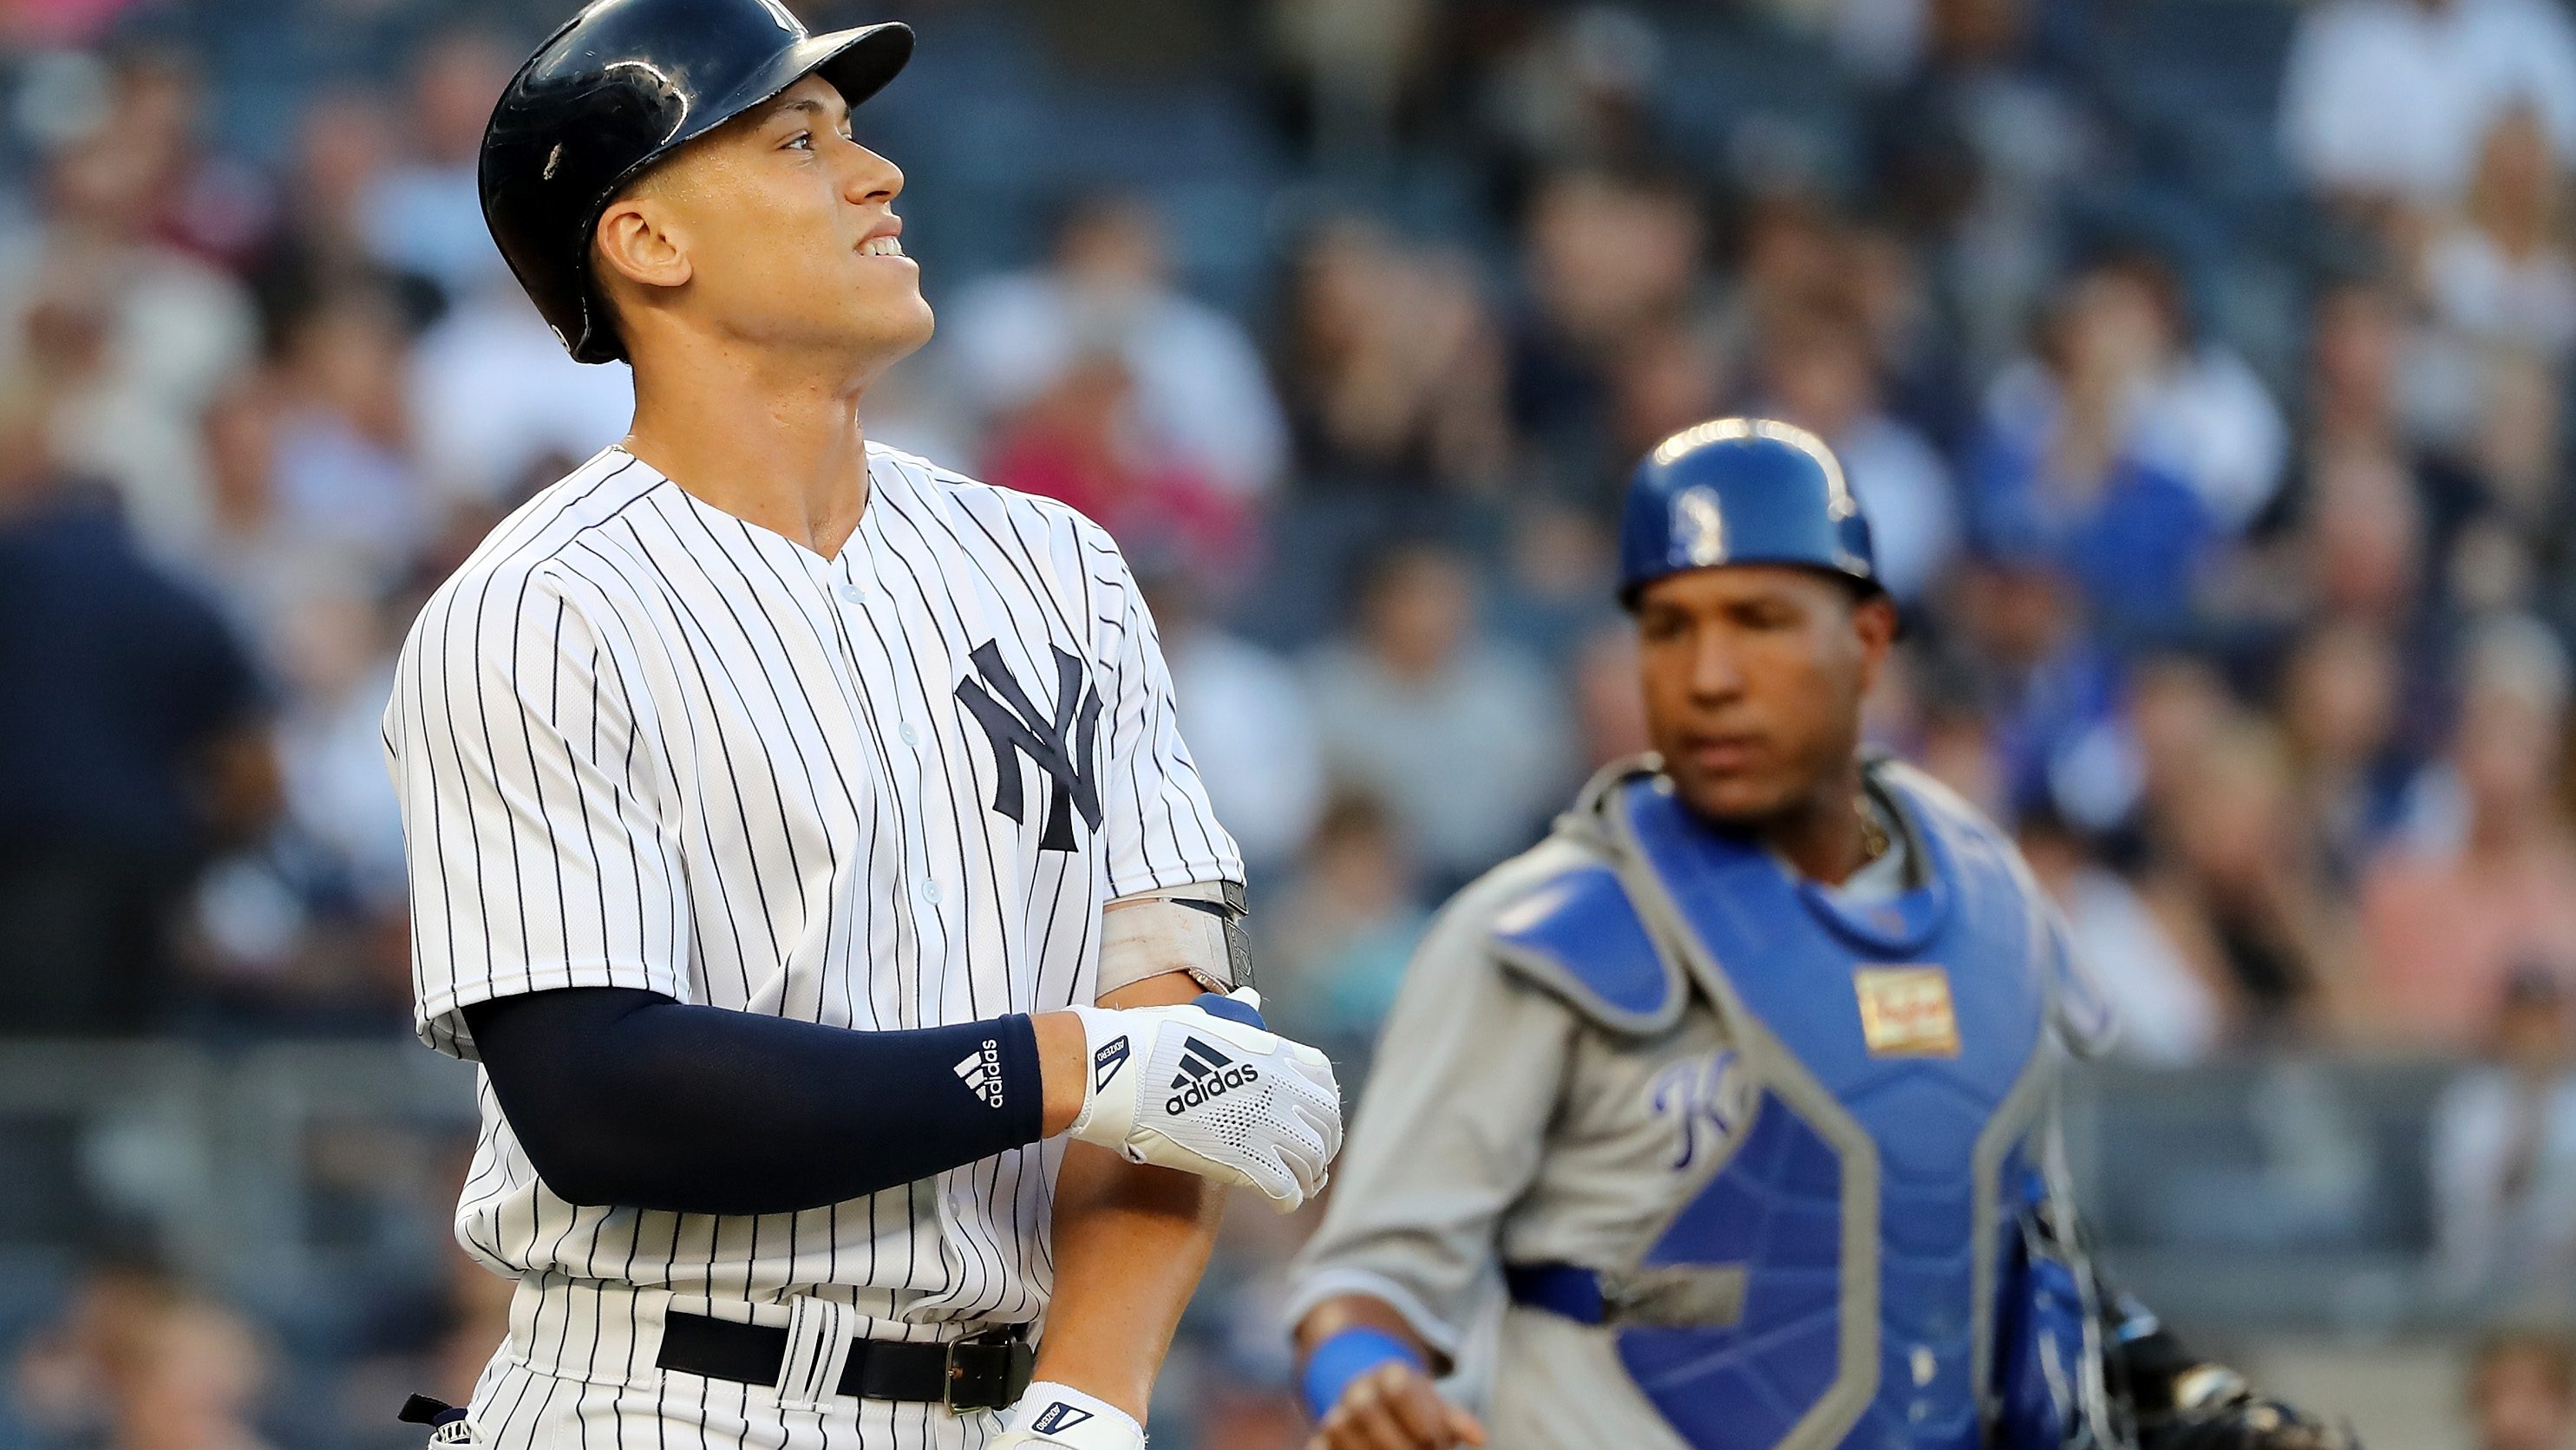 Aaron Judge Wrist Injury How Long Will He Be Out?